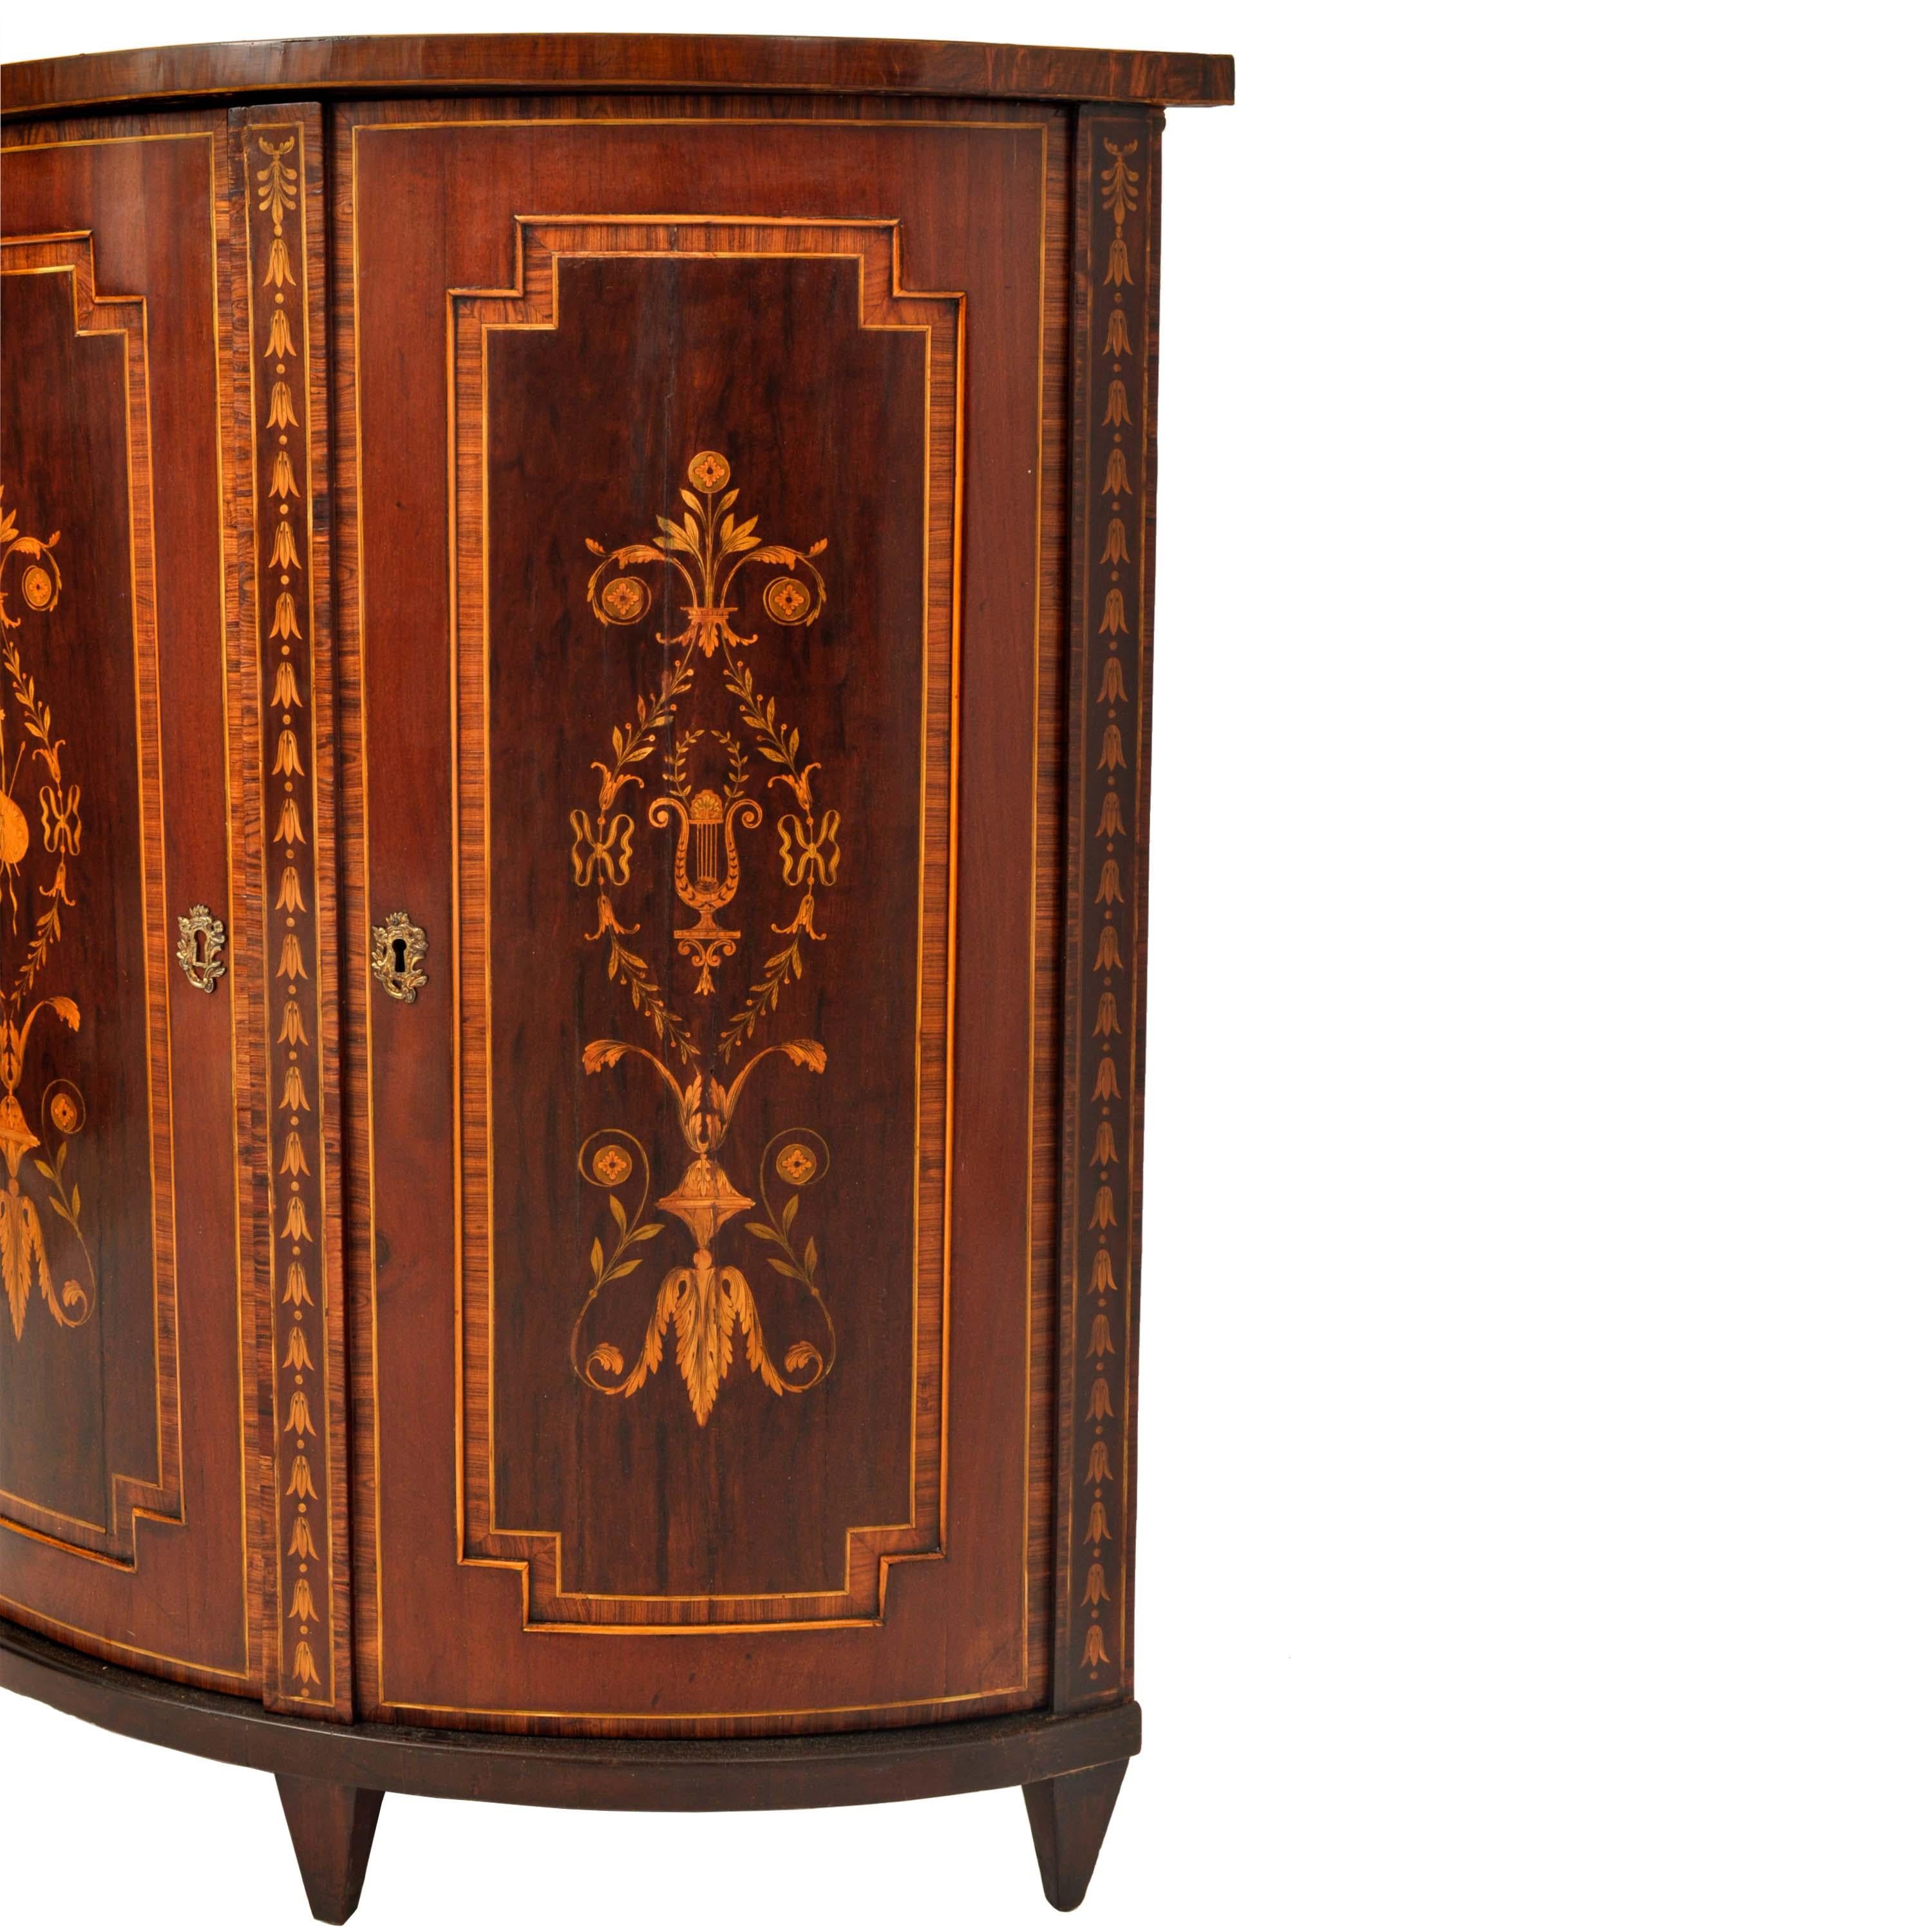 Early 19th Century Antique Georgian Regency Marquetry Bowfront Neoclassical Corner Cabinet 1800